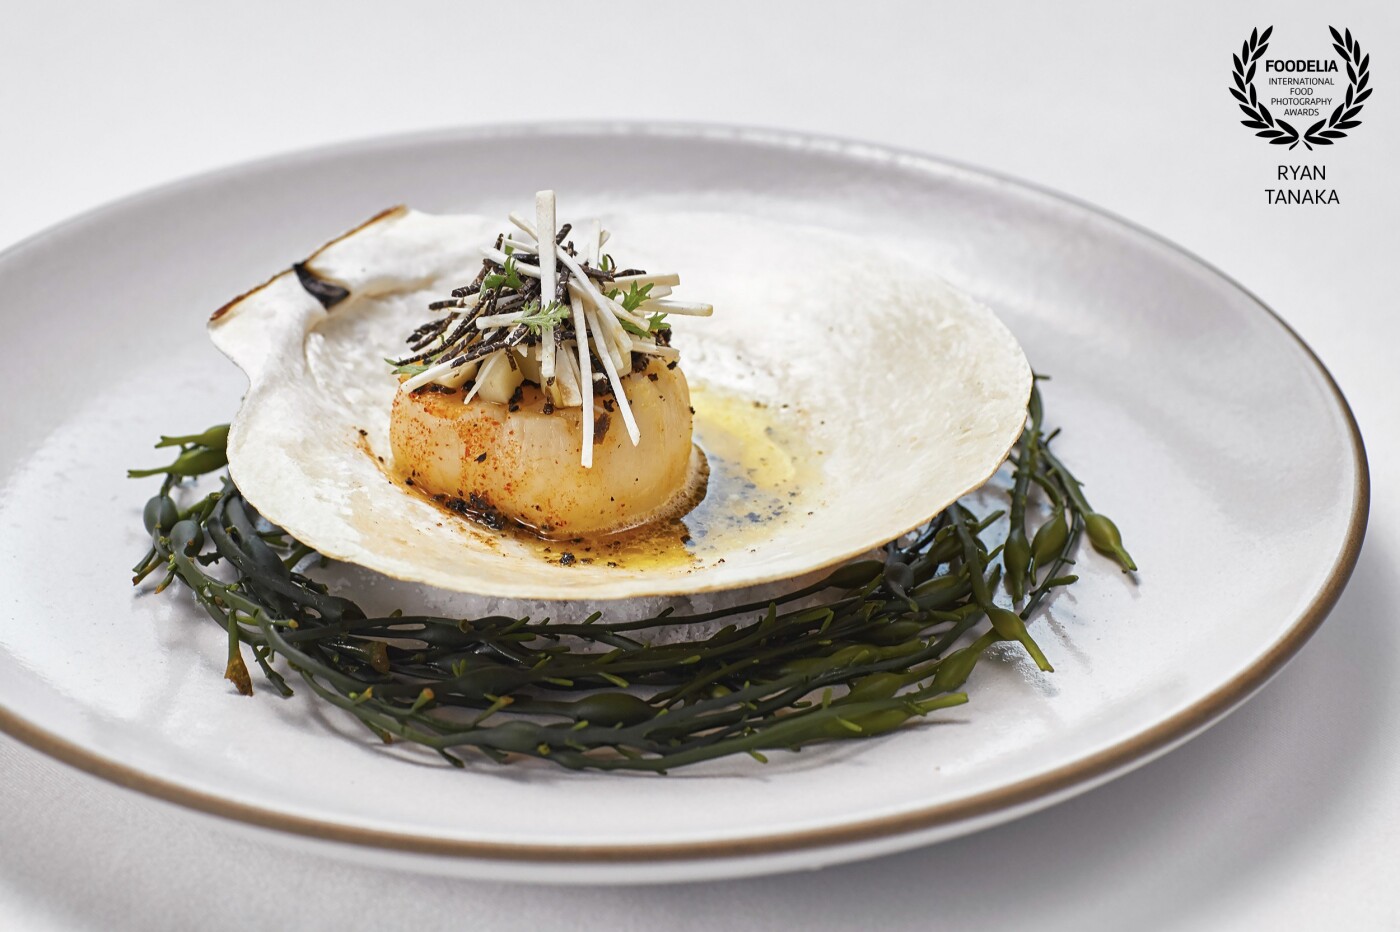 Scallop With Black Truffle Butter or Porcini.<br />
<br />
Restaurant: Providence (@providencela)<br />
Chef: Michael Cimarusti (@cimarustila)<br />
<br />
This was featured in Zagat's article (written by Lesley Balla, @lesleyla) highlighting the restaurant's ten year anniversary. 